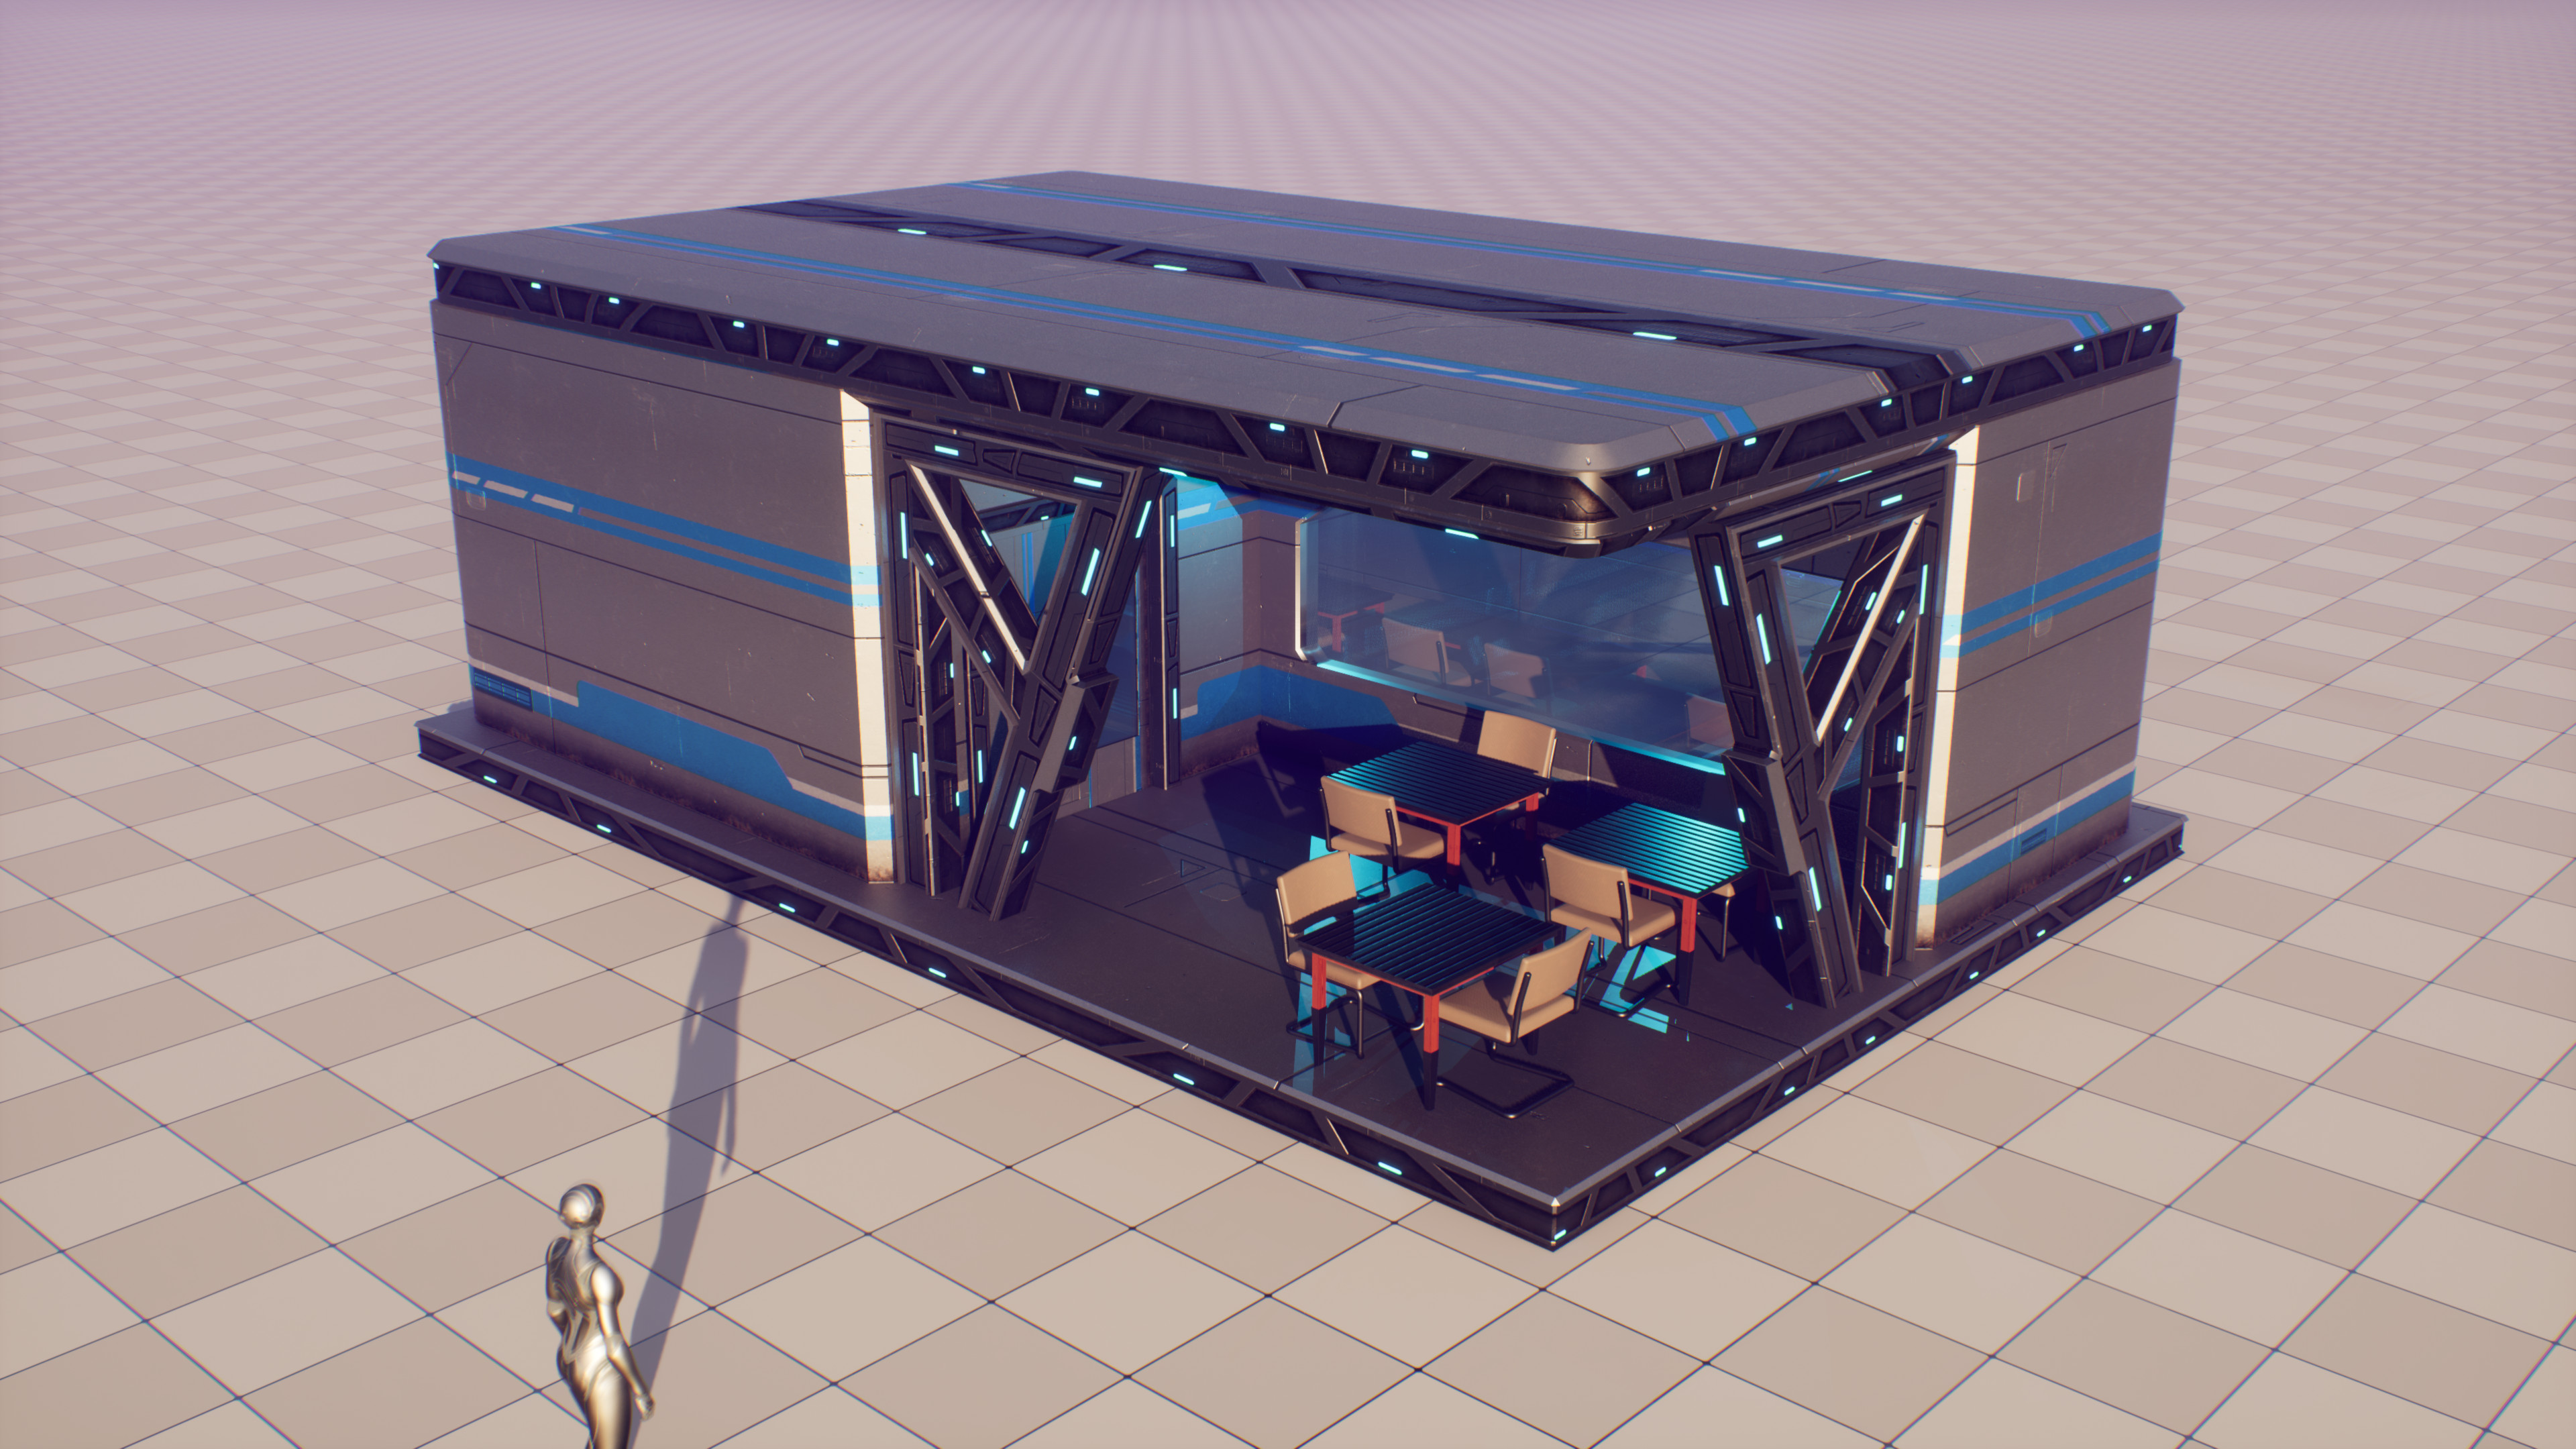 Here you can see an overall view of the little diner. This is the first piece of a villa project I am developing in UE5. 